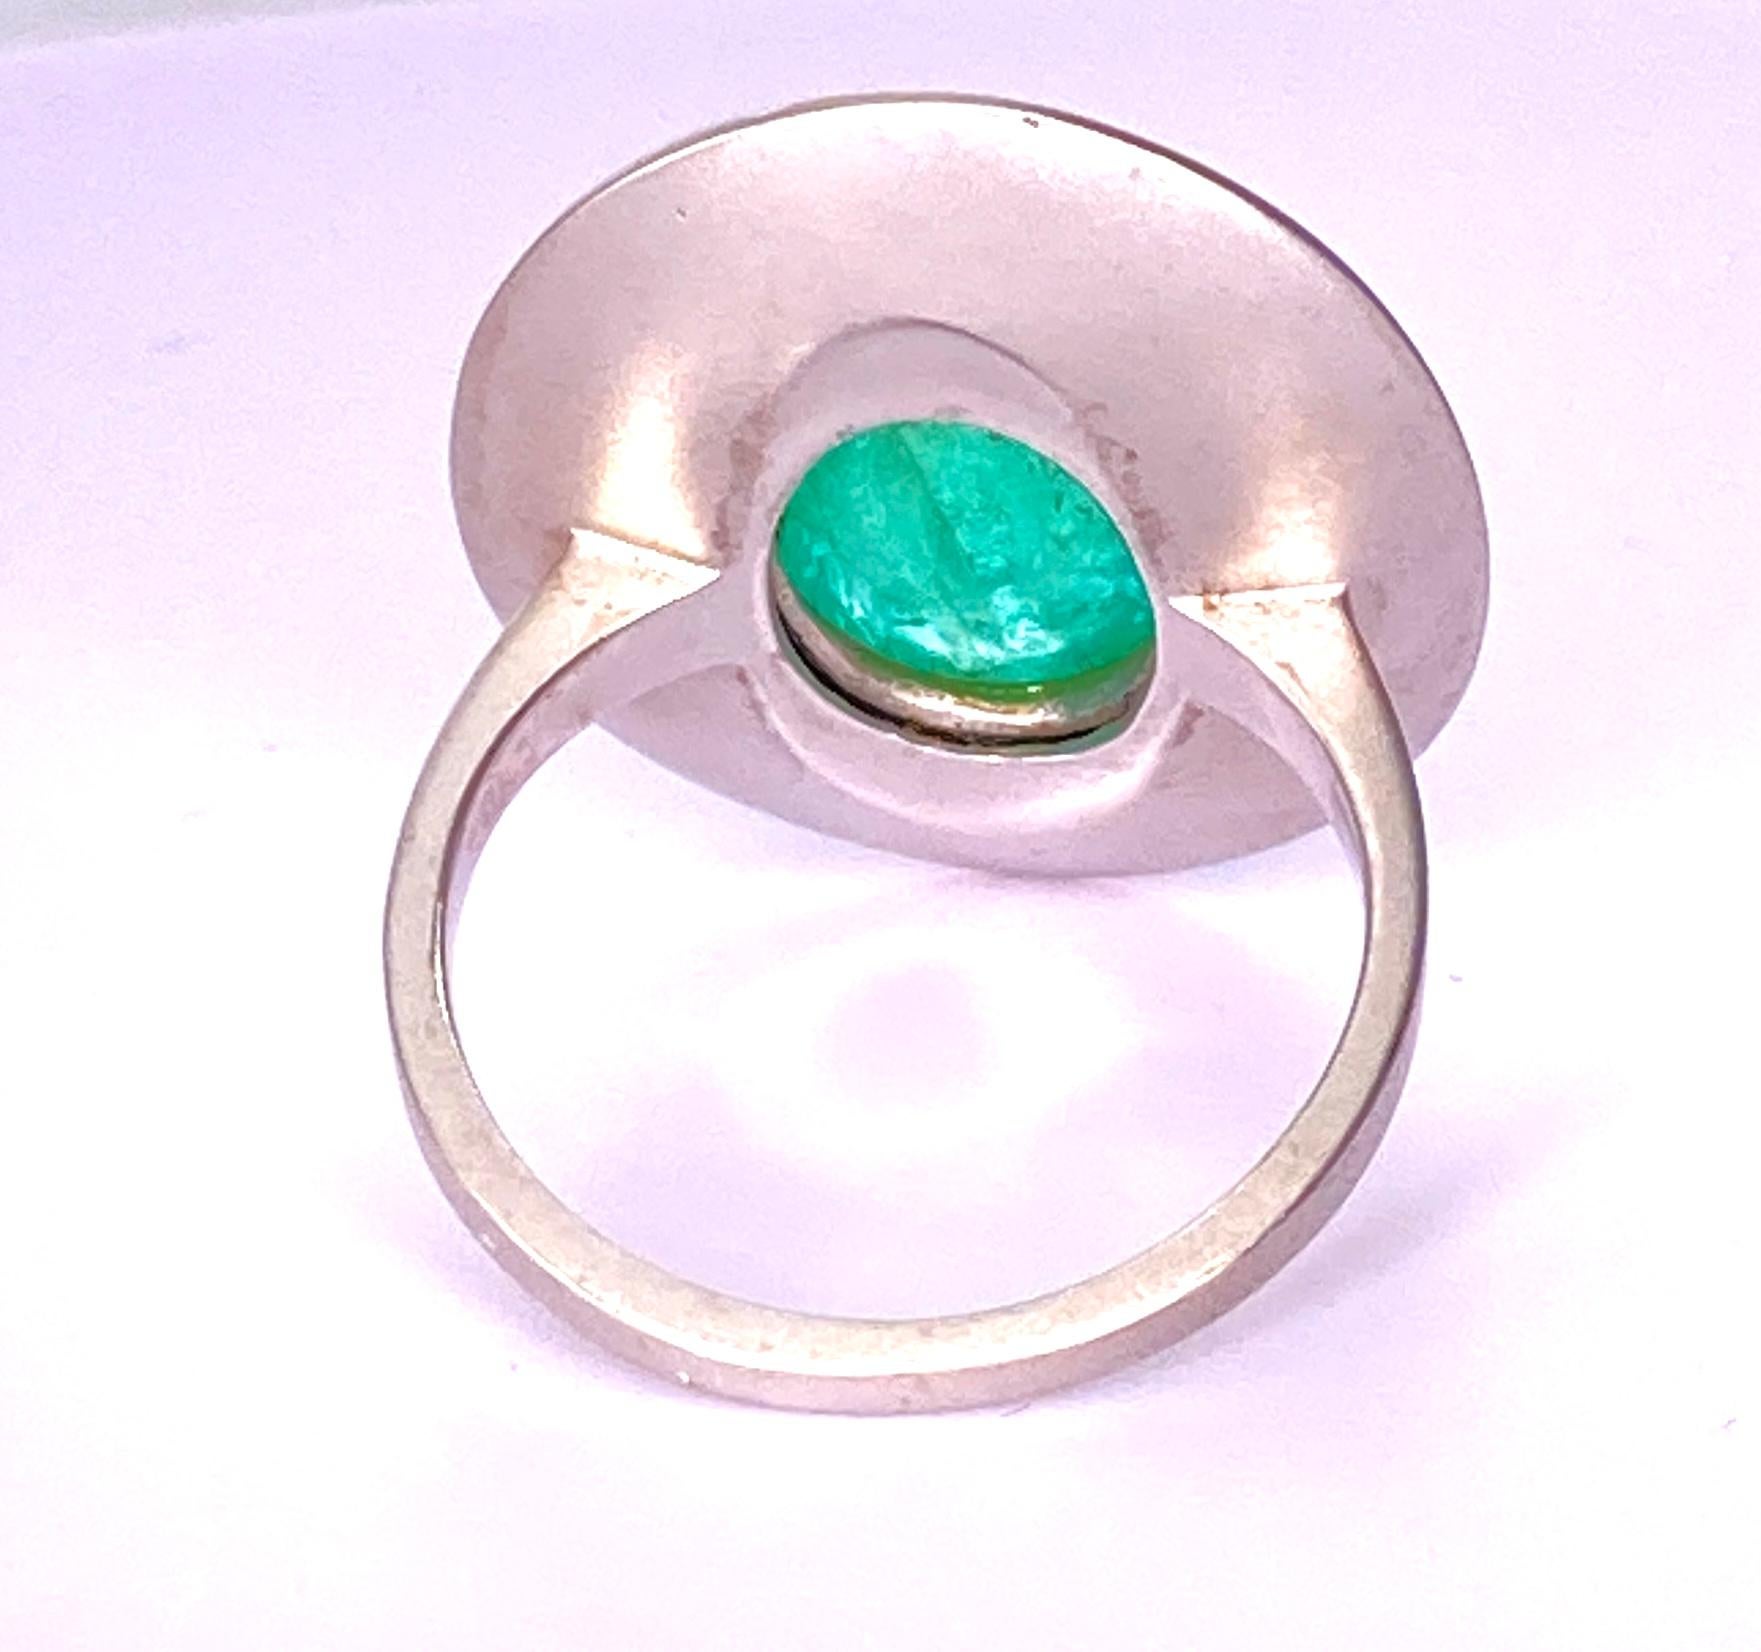 This 8 carat Paraiba Tourmaline Cabochon has both blue and green tones depending on the angle. Set in 18Kt White gold, Sand Blasted finish.